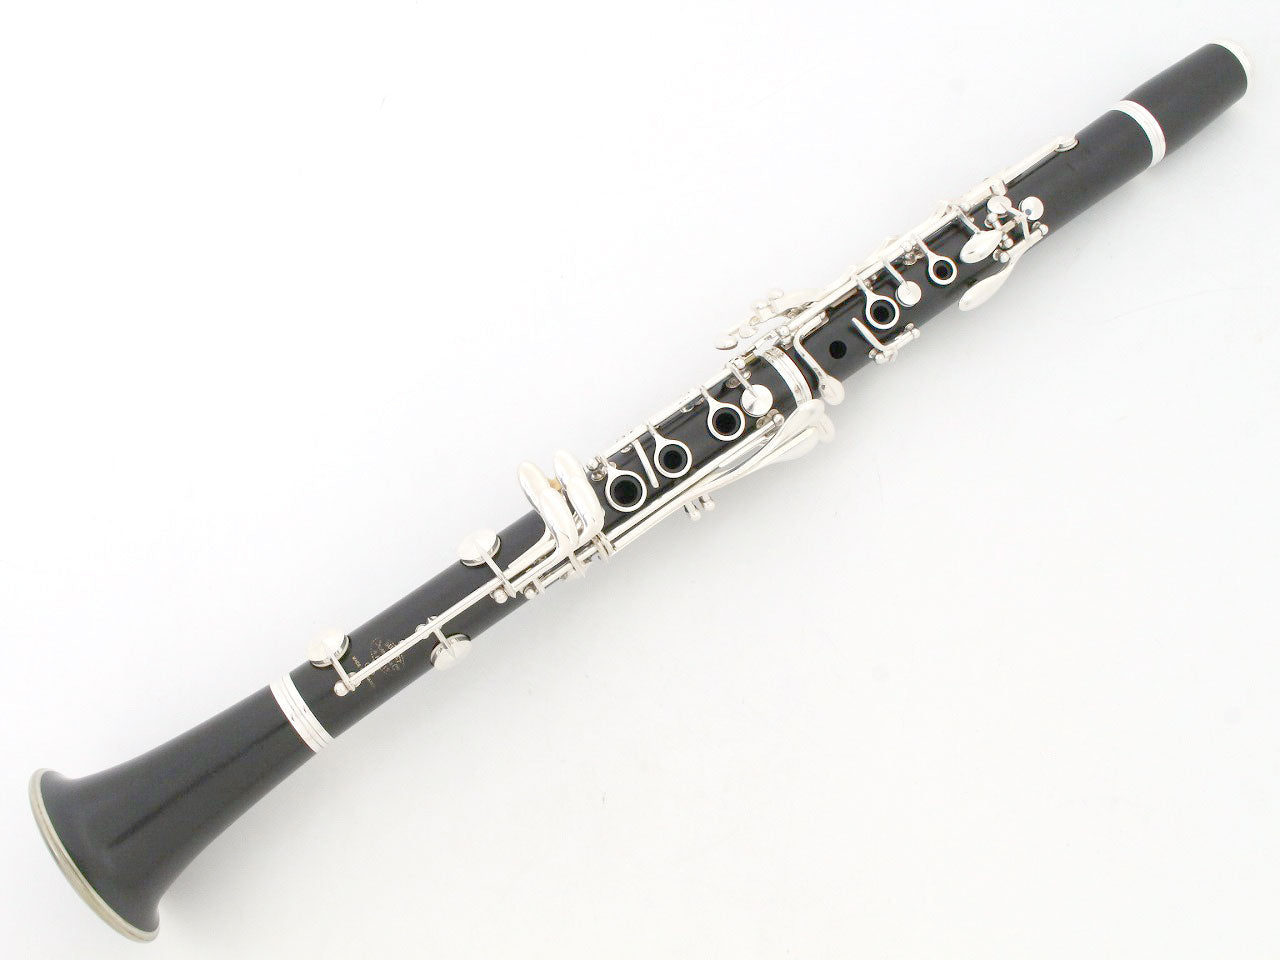 [SN K231298] USED Buffet Crampon / B flat clarinet E13 SP, all tampos replaced [09]